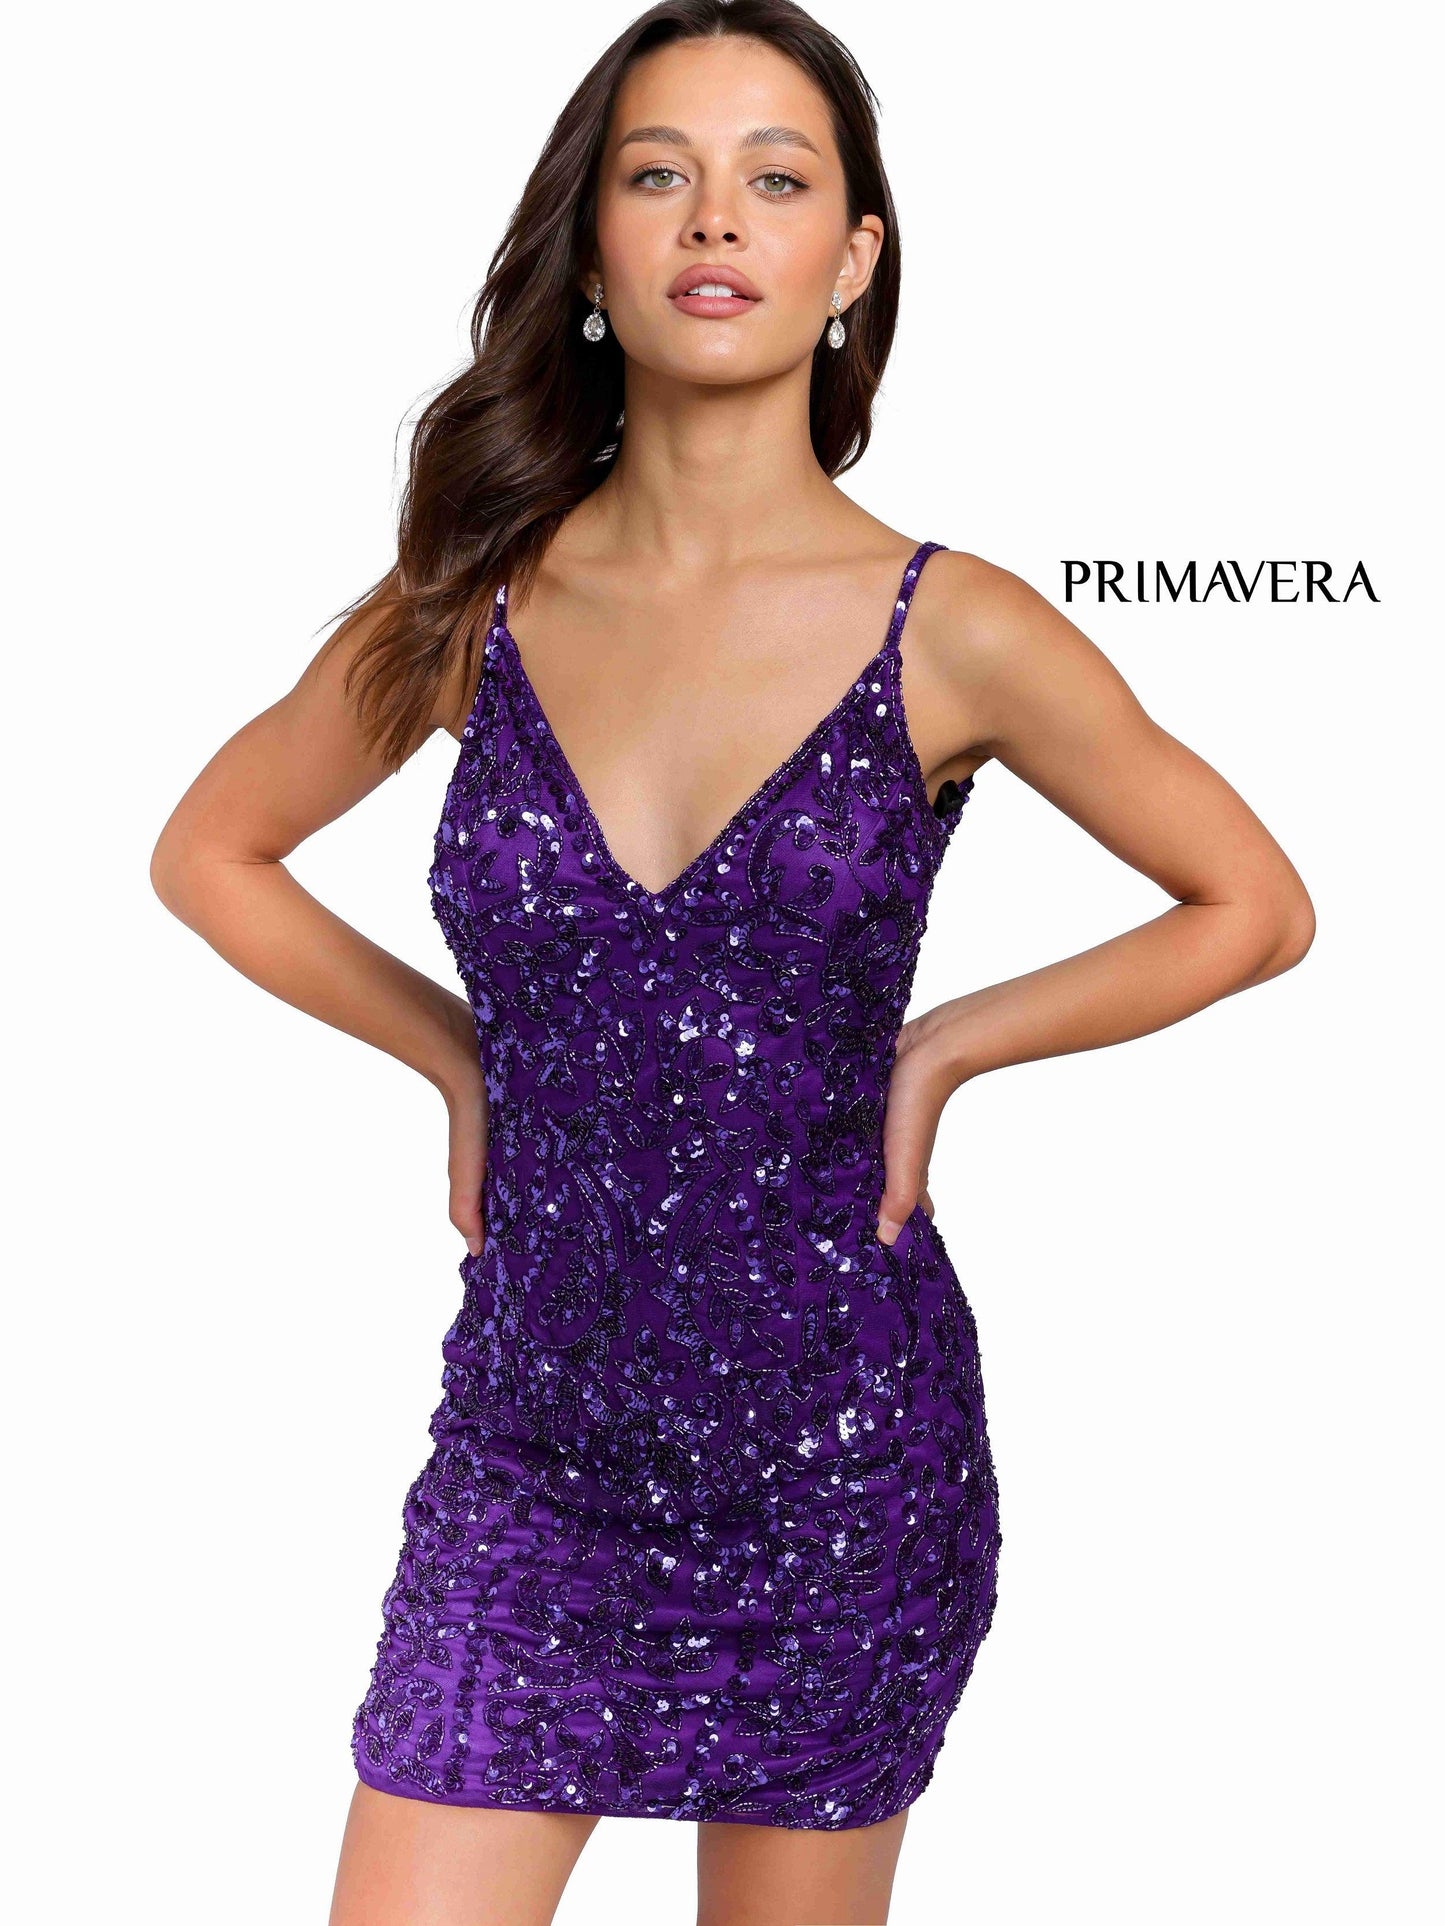 Primavera Couture Prom Short Beaded Dress 3813 - The Dress Outlet